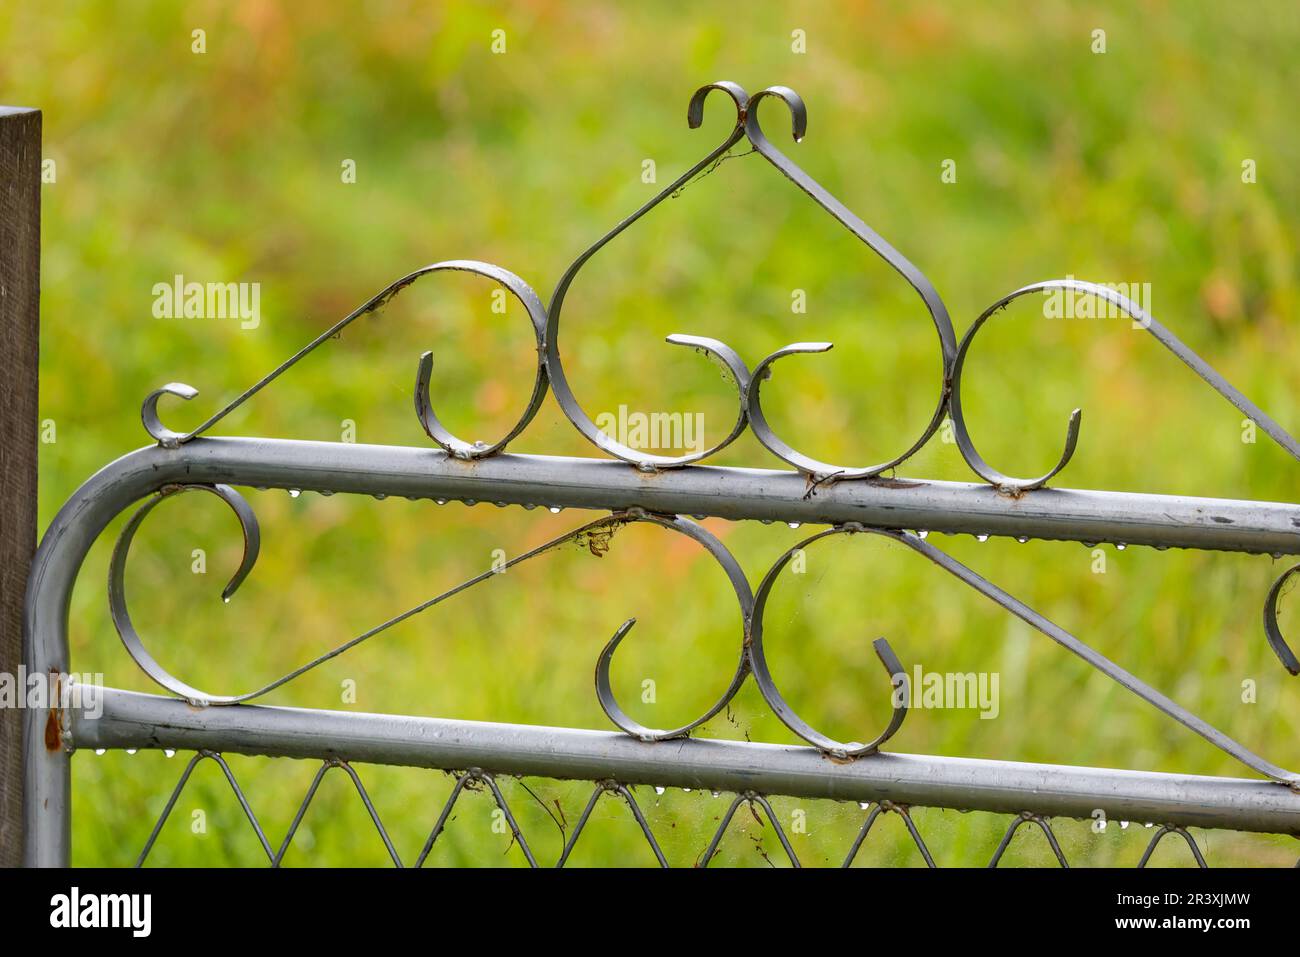 Water droplets cling to an ornate galvanized steel gate on a rainy day Stock Photo